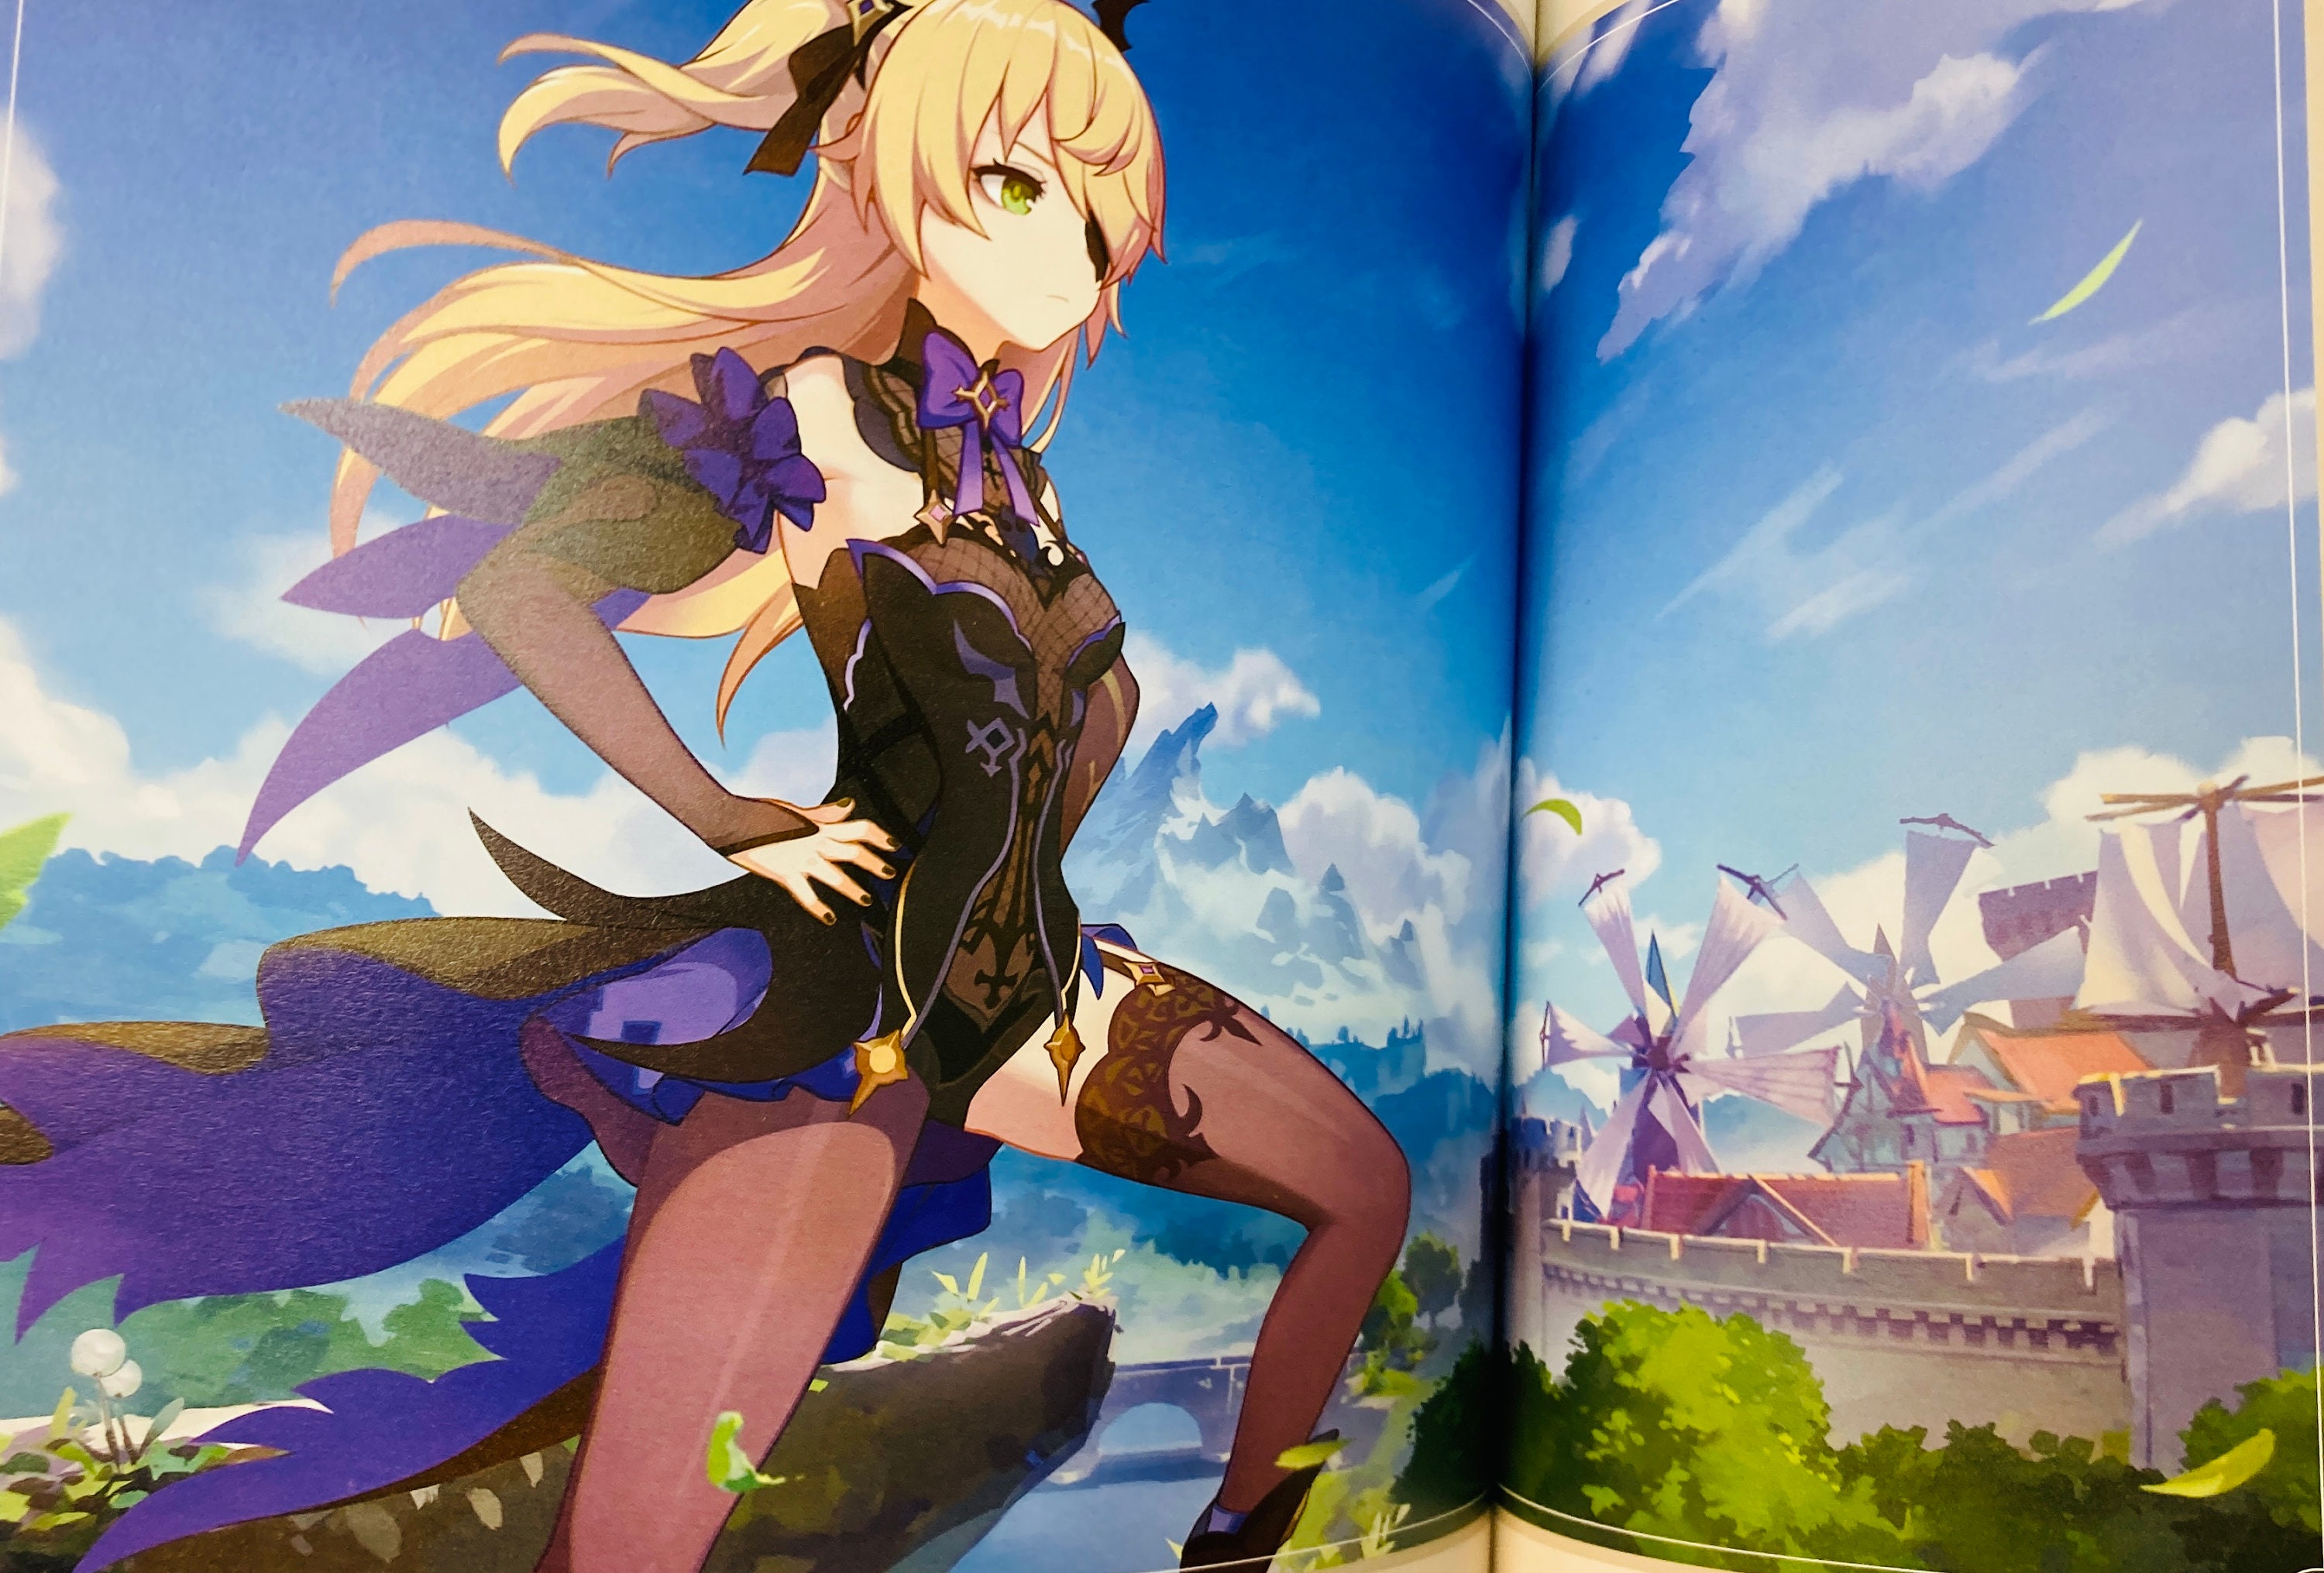 Managed to get my hands on the official Genshin artbook, it has all the  official illustrations up until 1.6 : r/Genshin_Impact